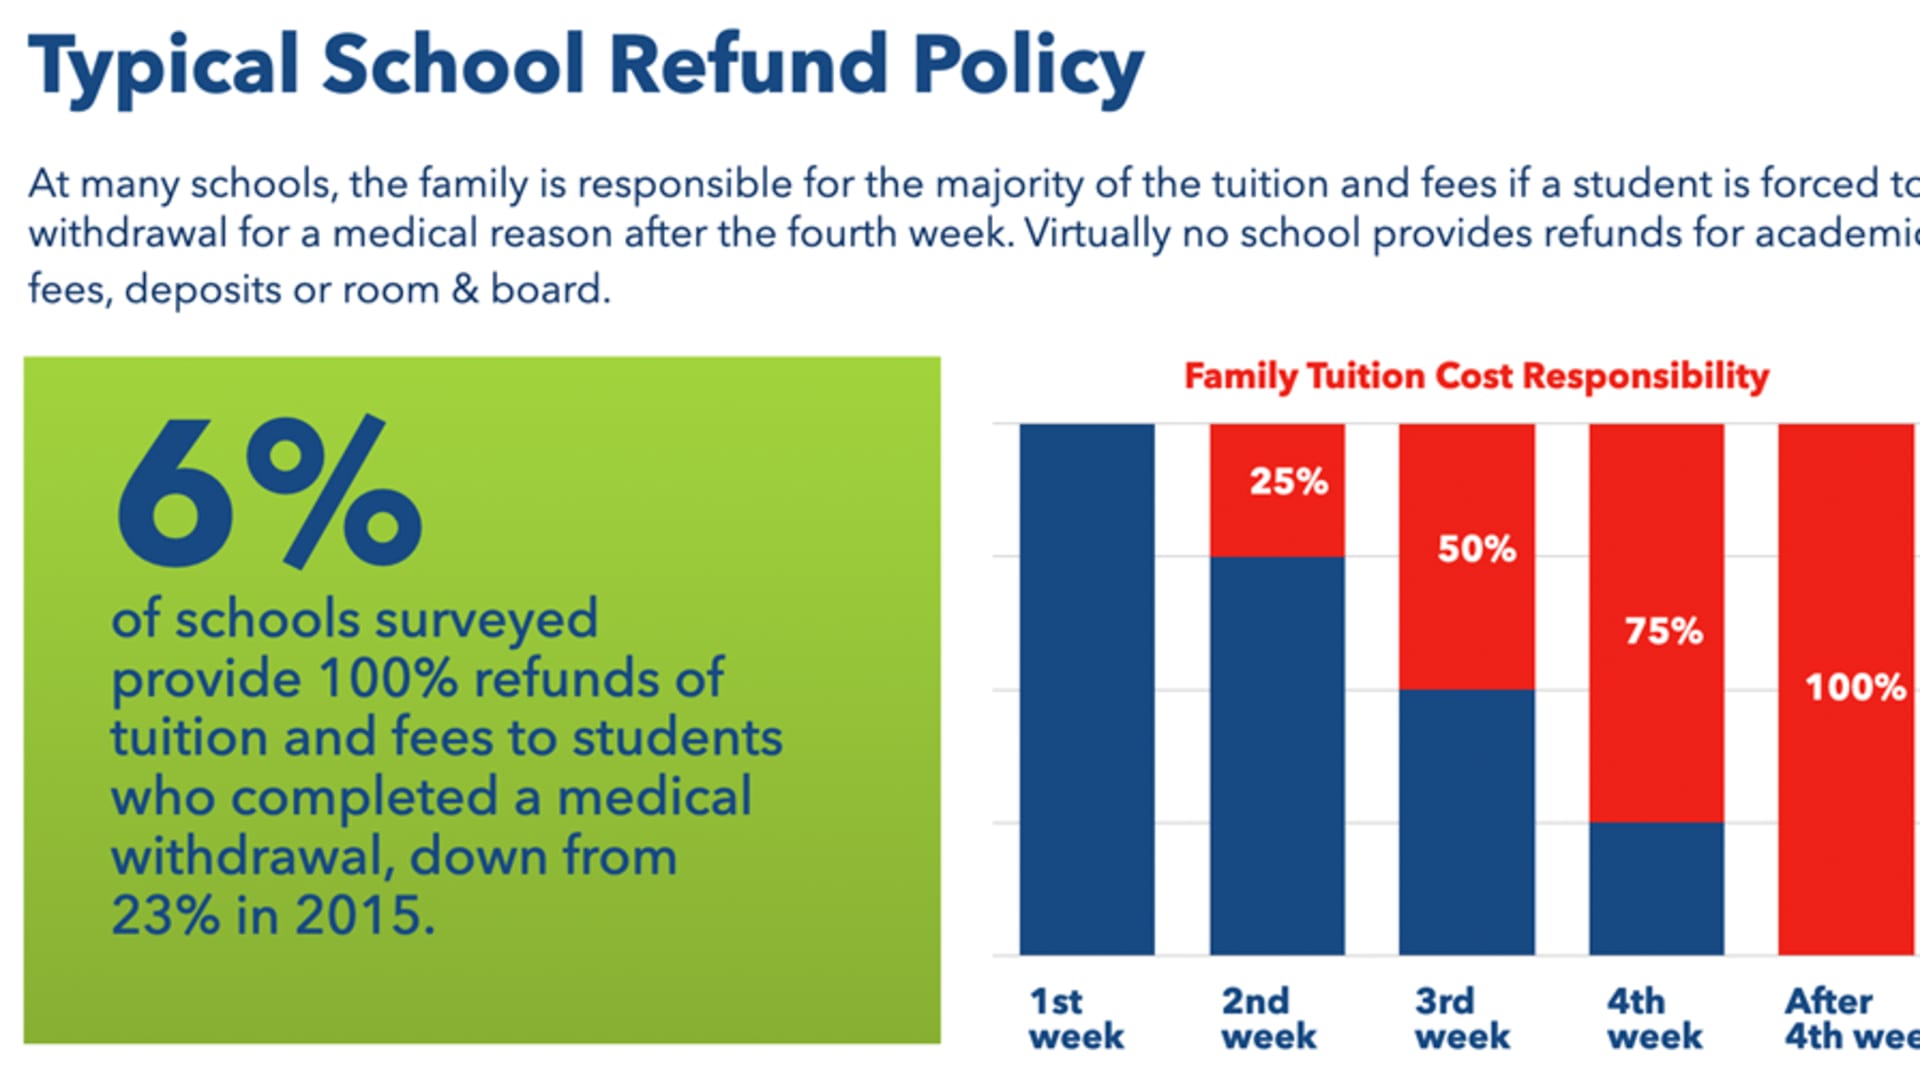 Typical School Refund Policy